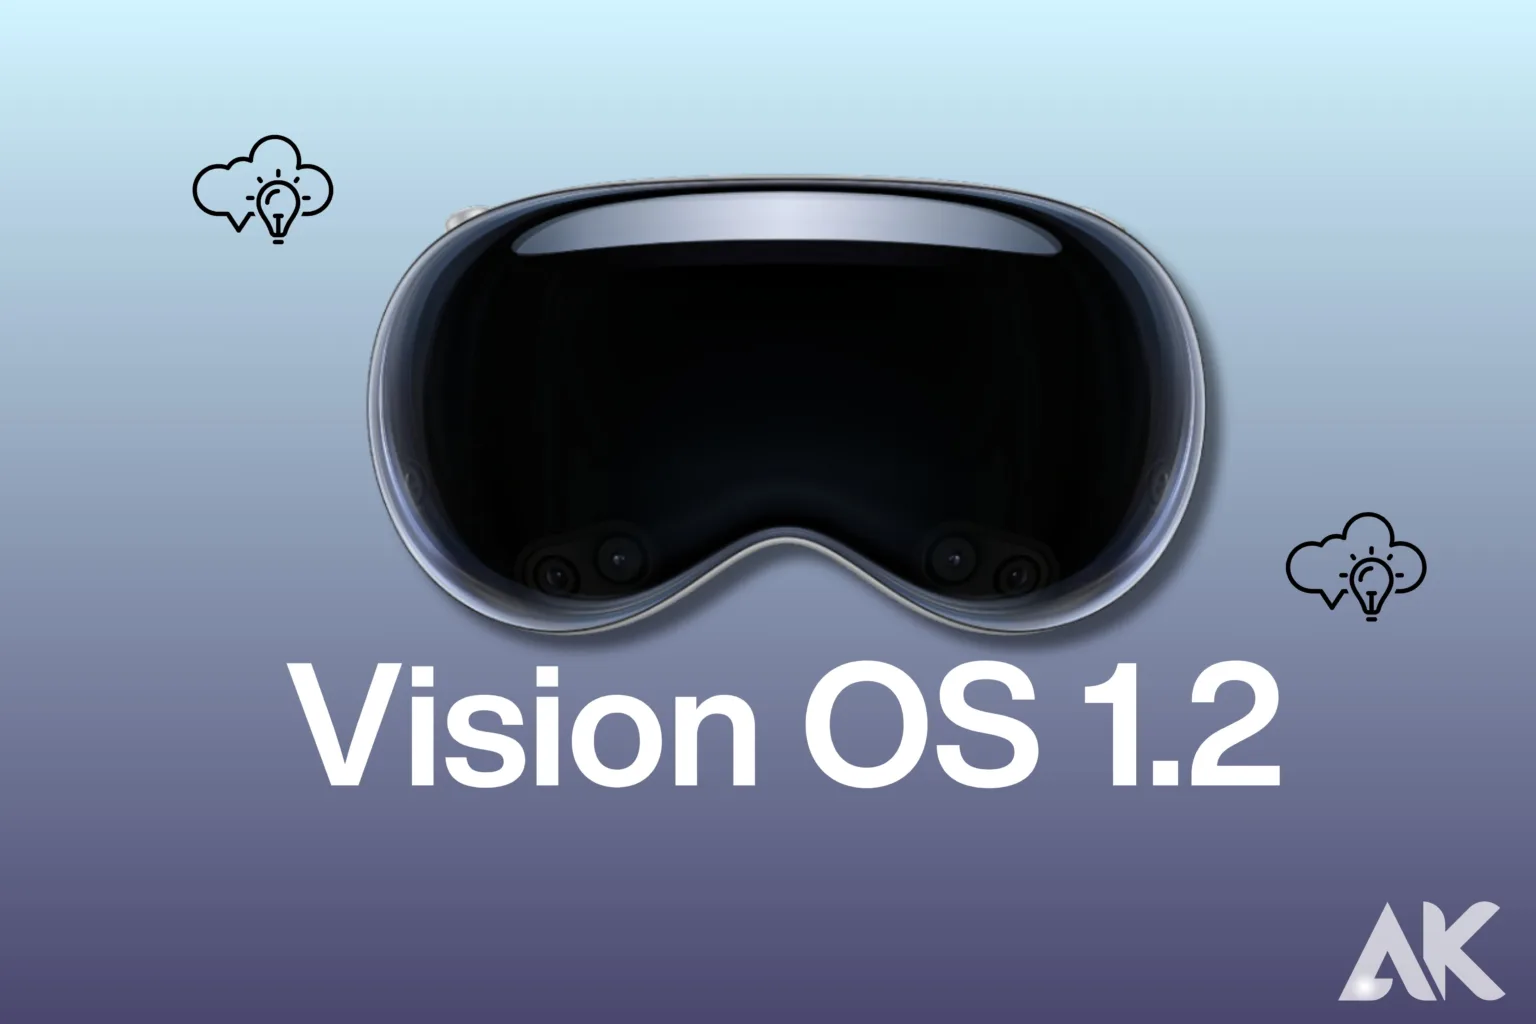 Vision OS 1.2 tips and tricks